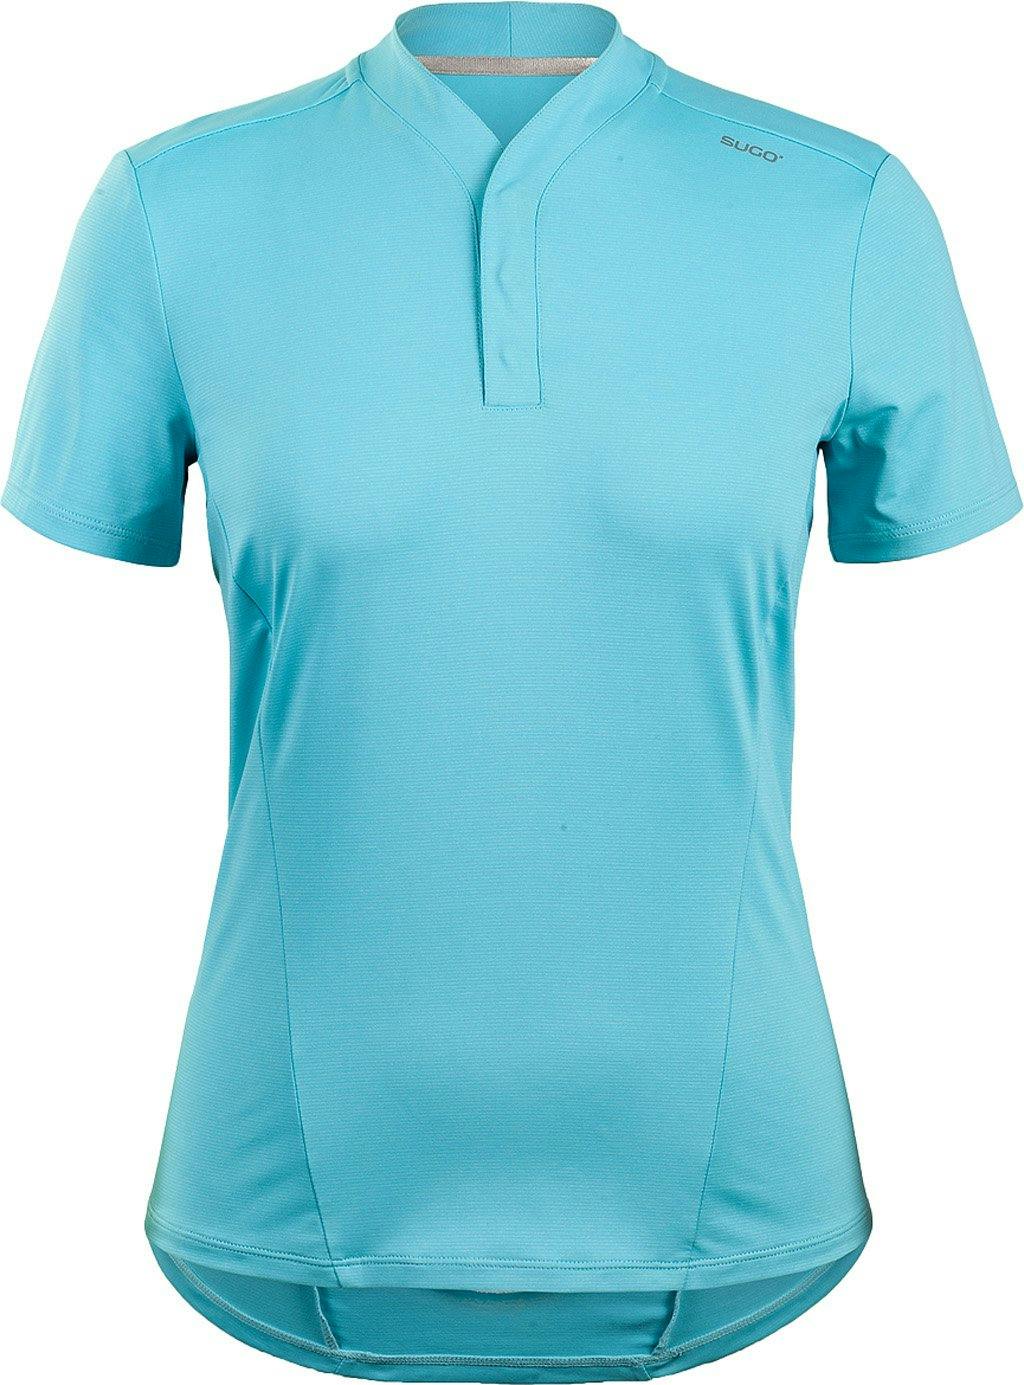 Product image for Ard Jersey  - Women's